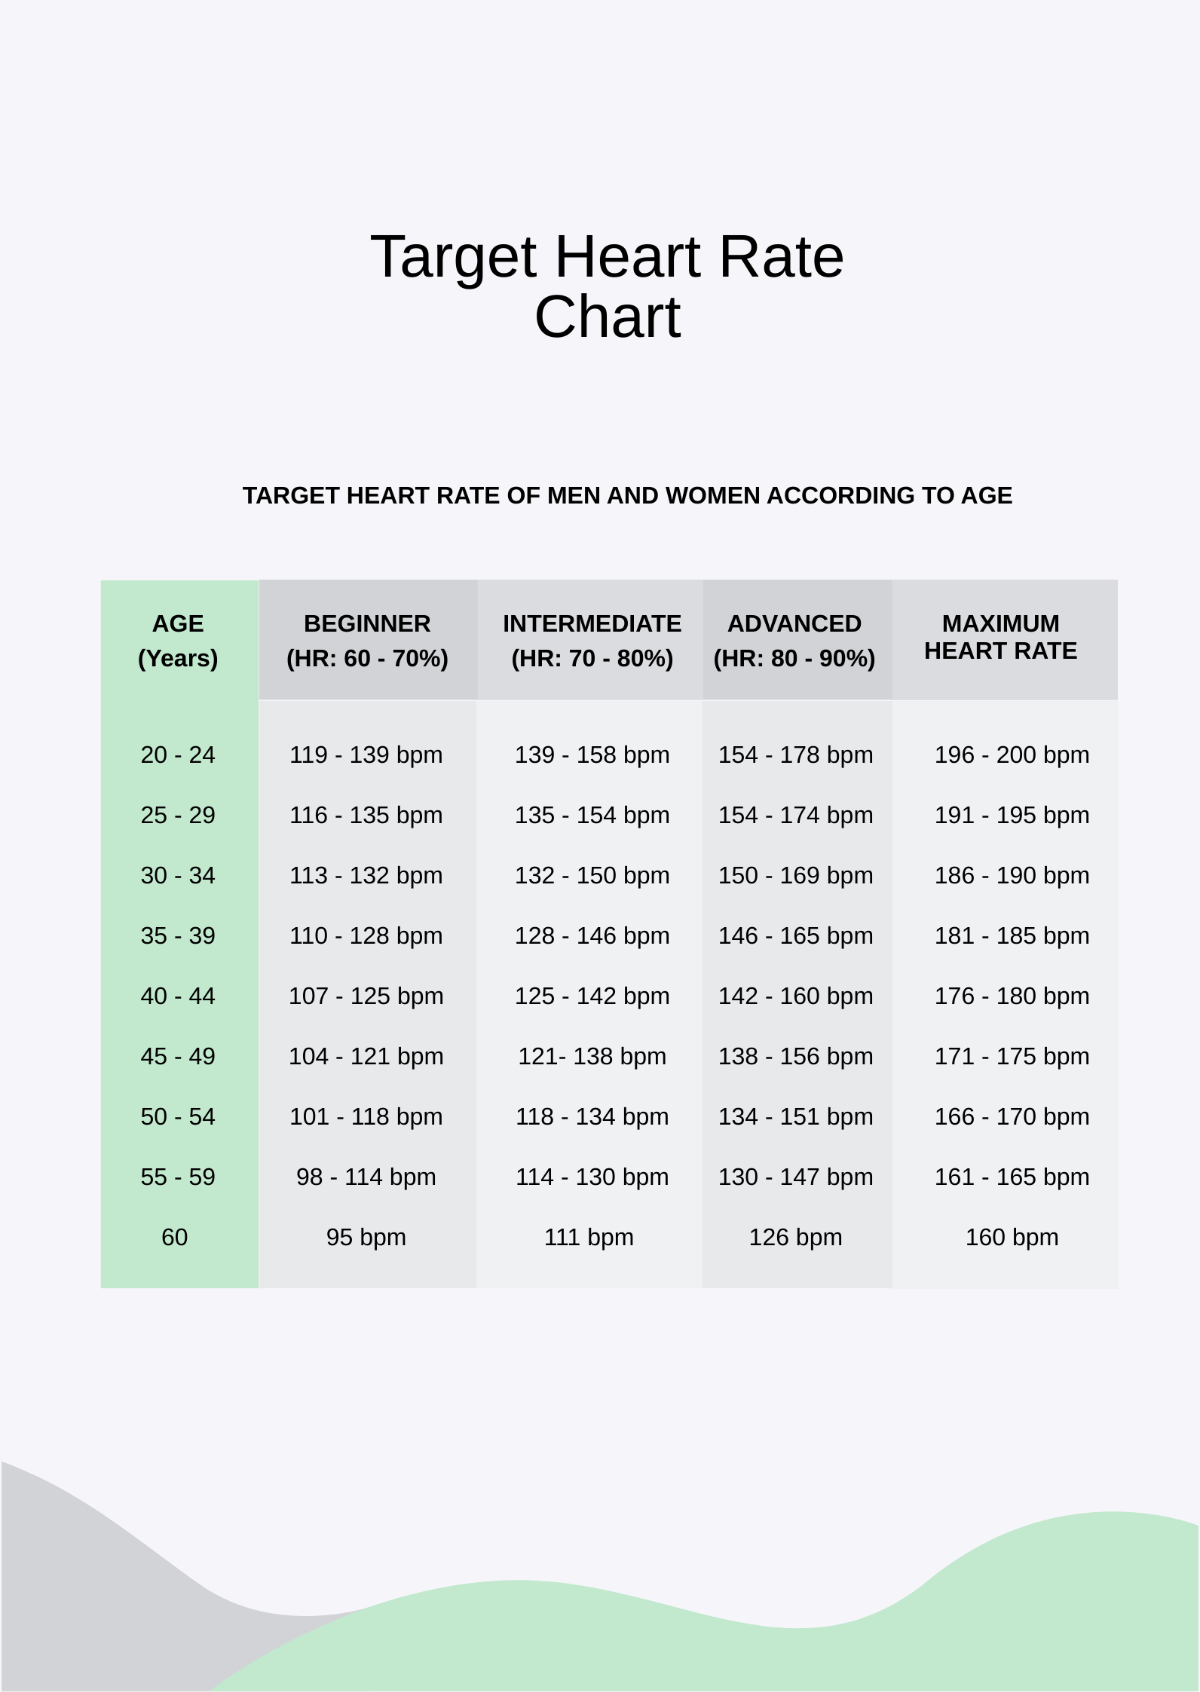 Target Heart Rate Chart Template